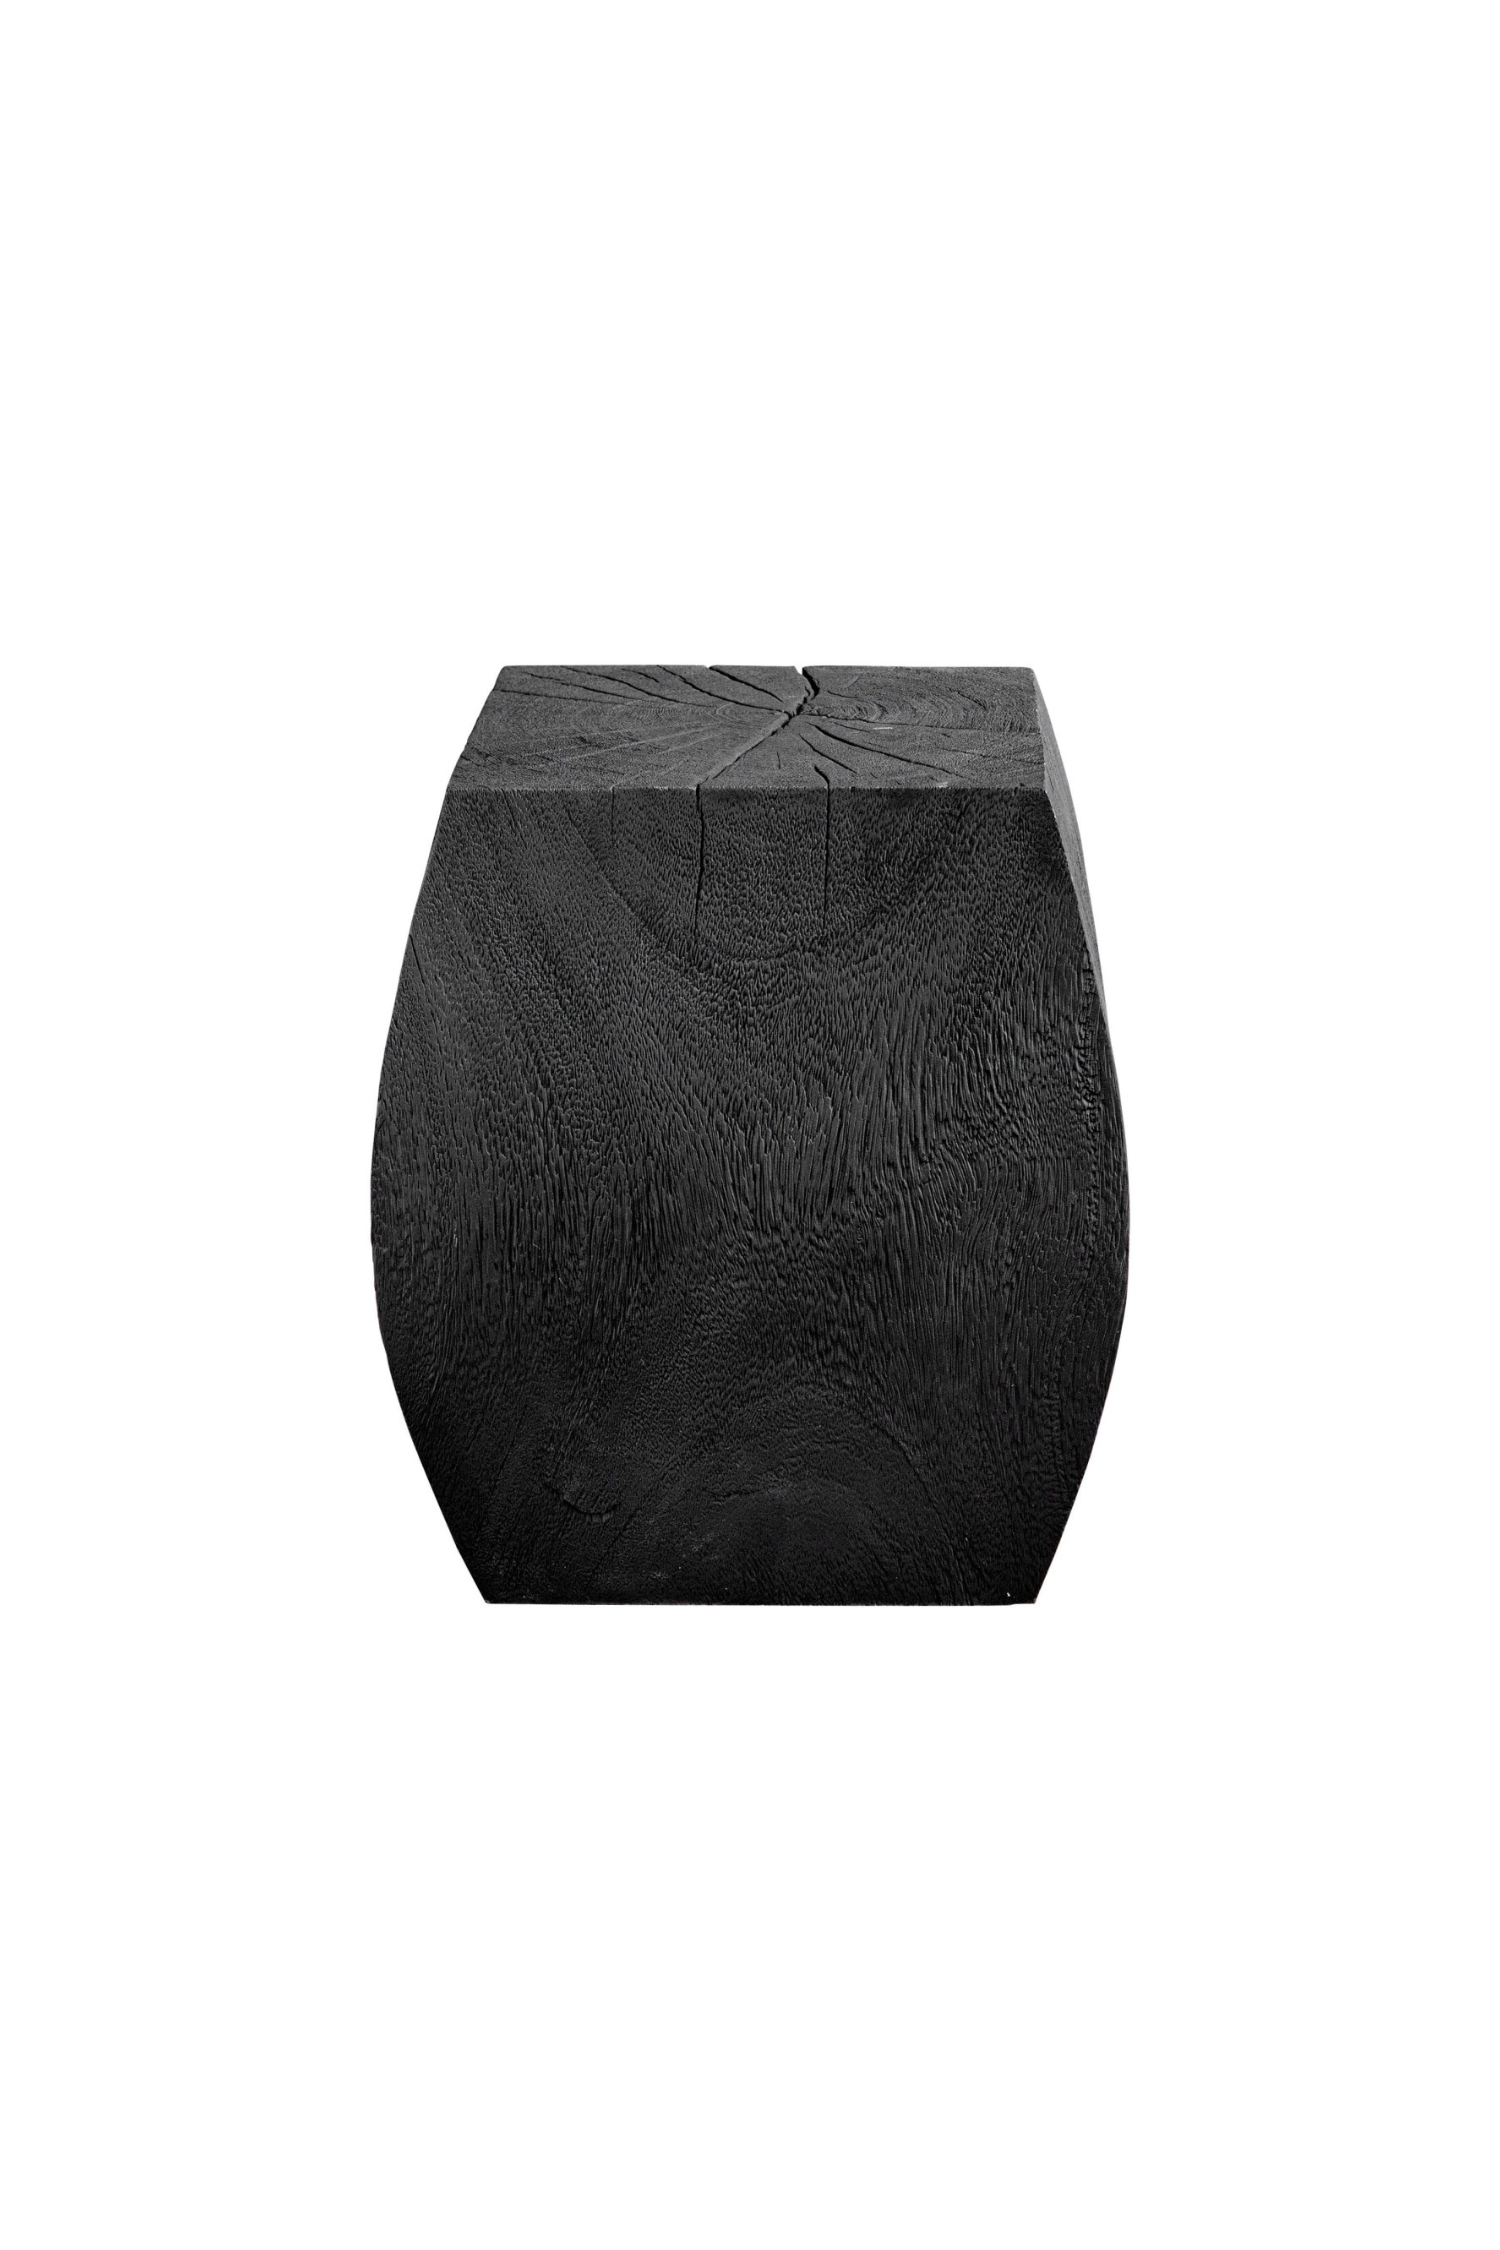 Groove Accent Stool